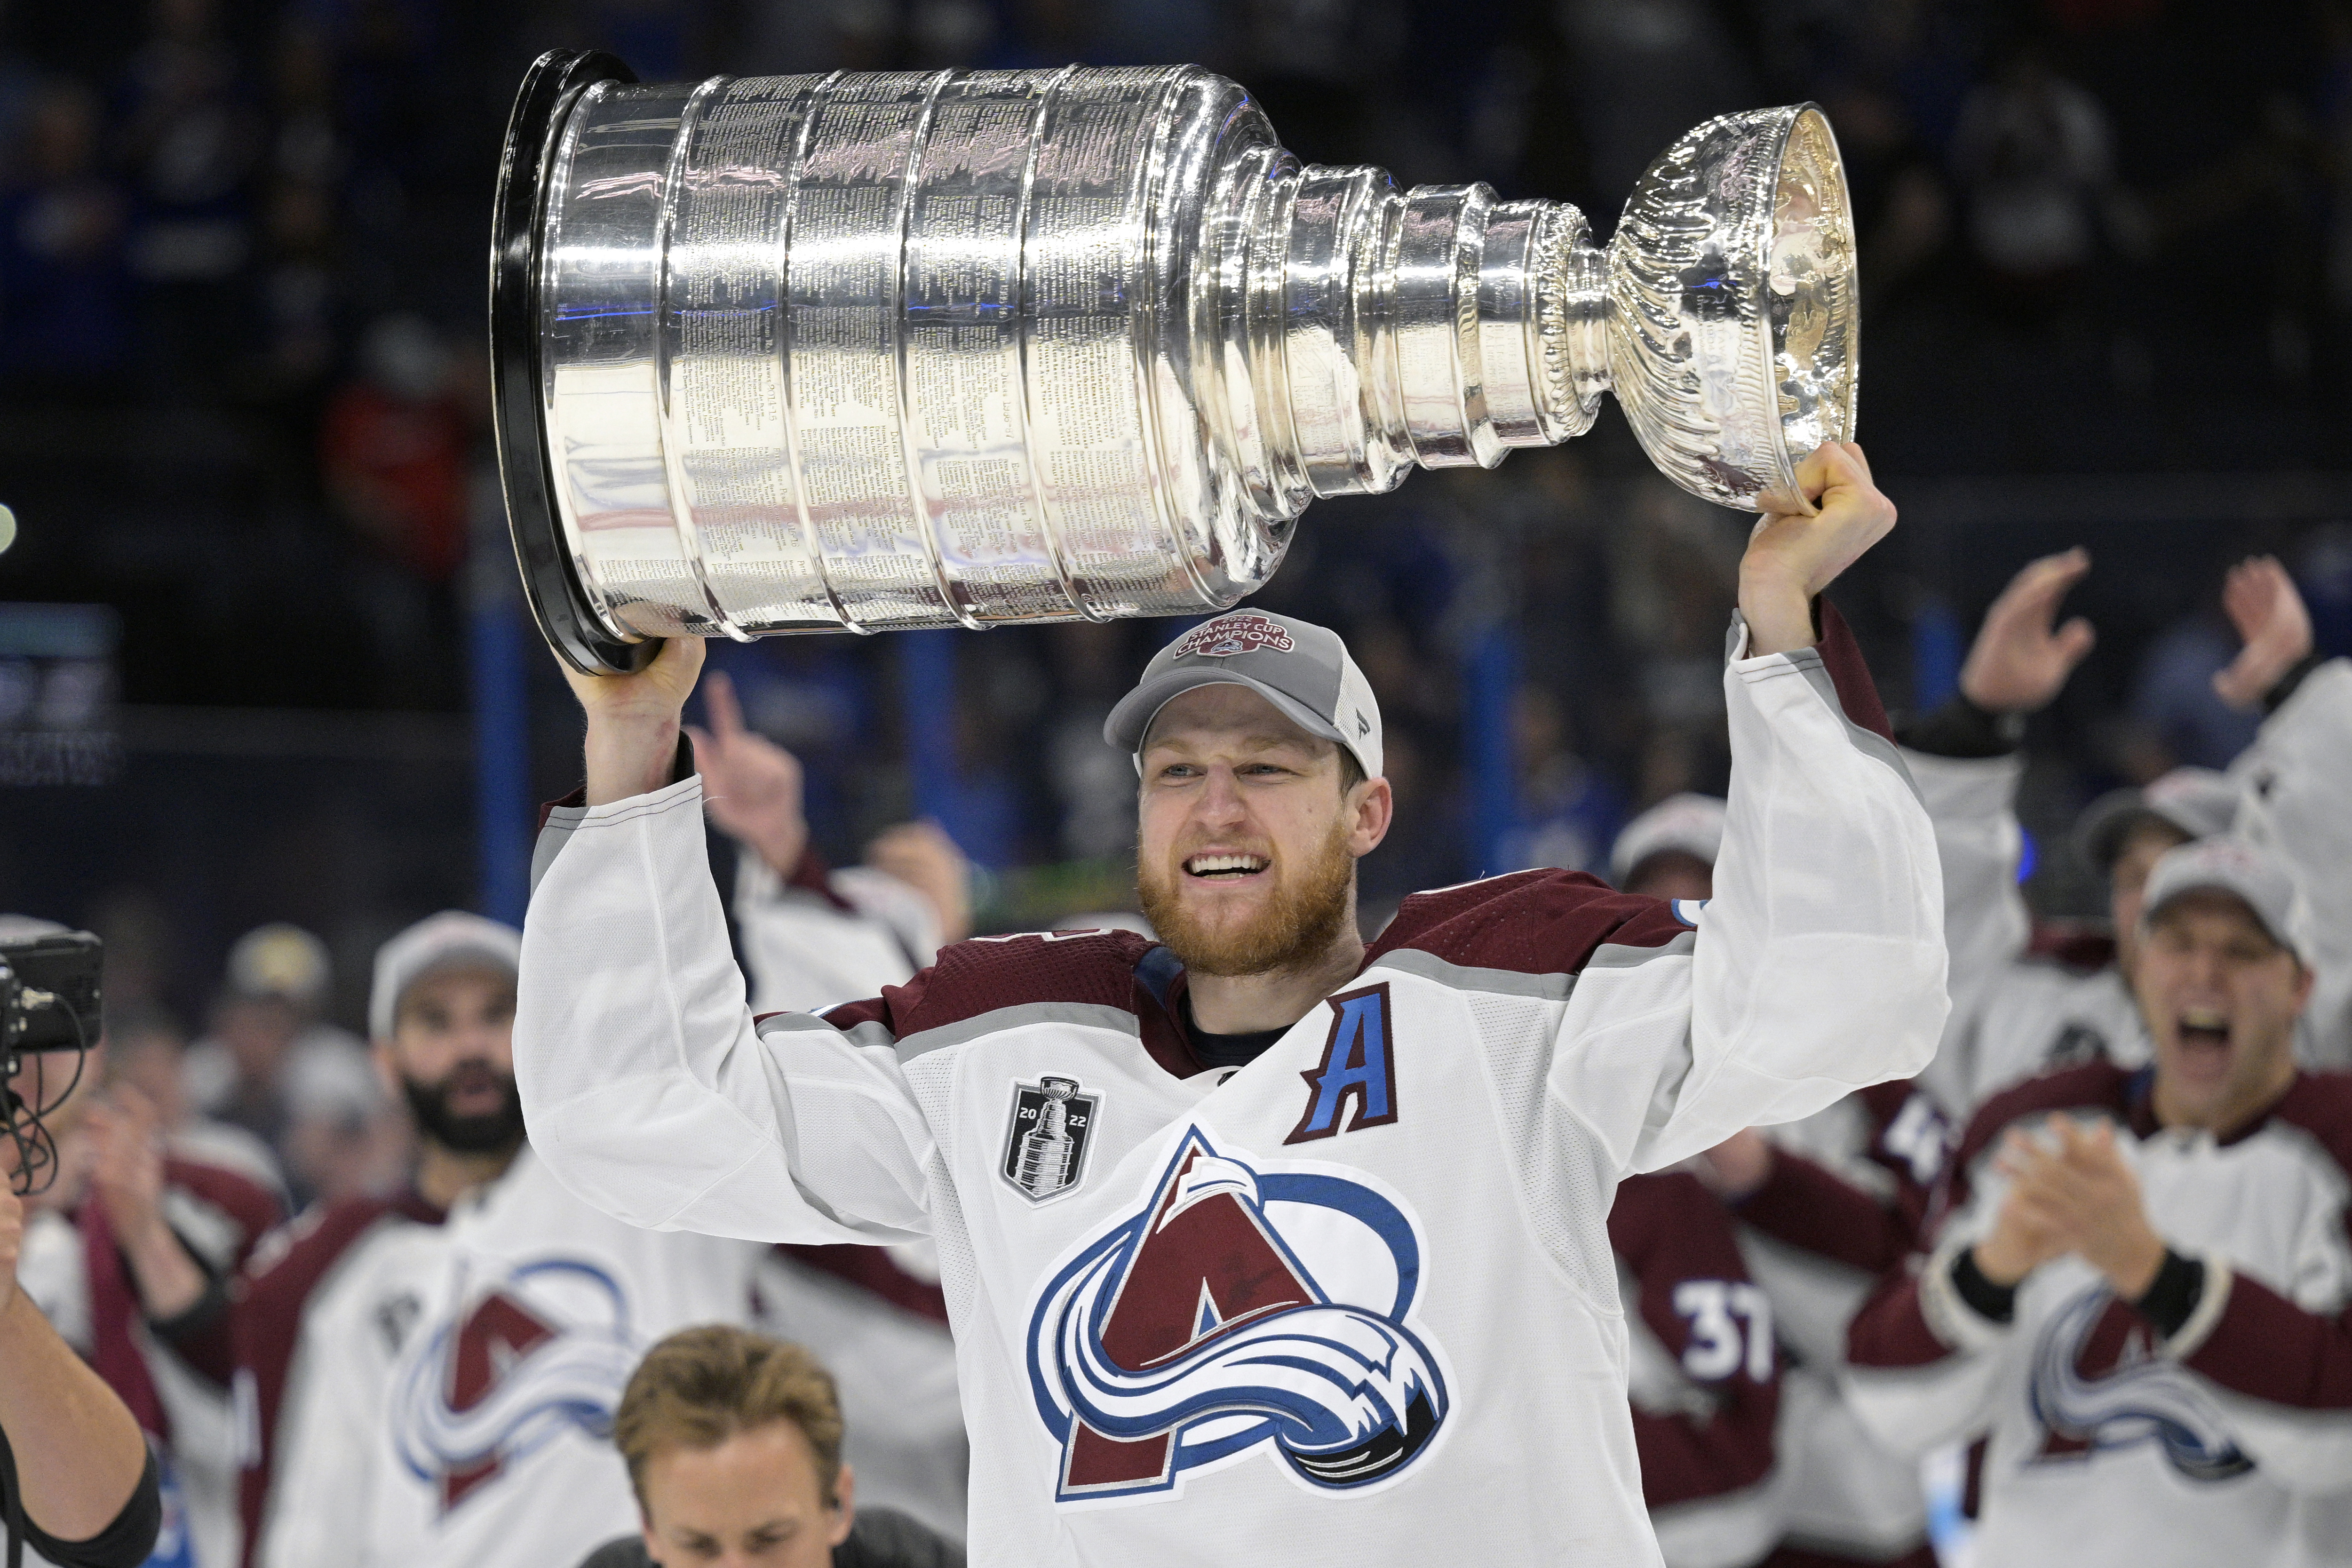 Colorado Avalanche live it up as they celebrate Stanley Cup title